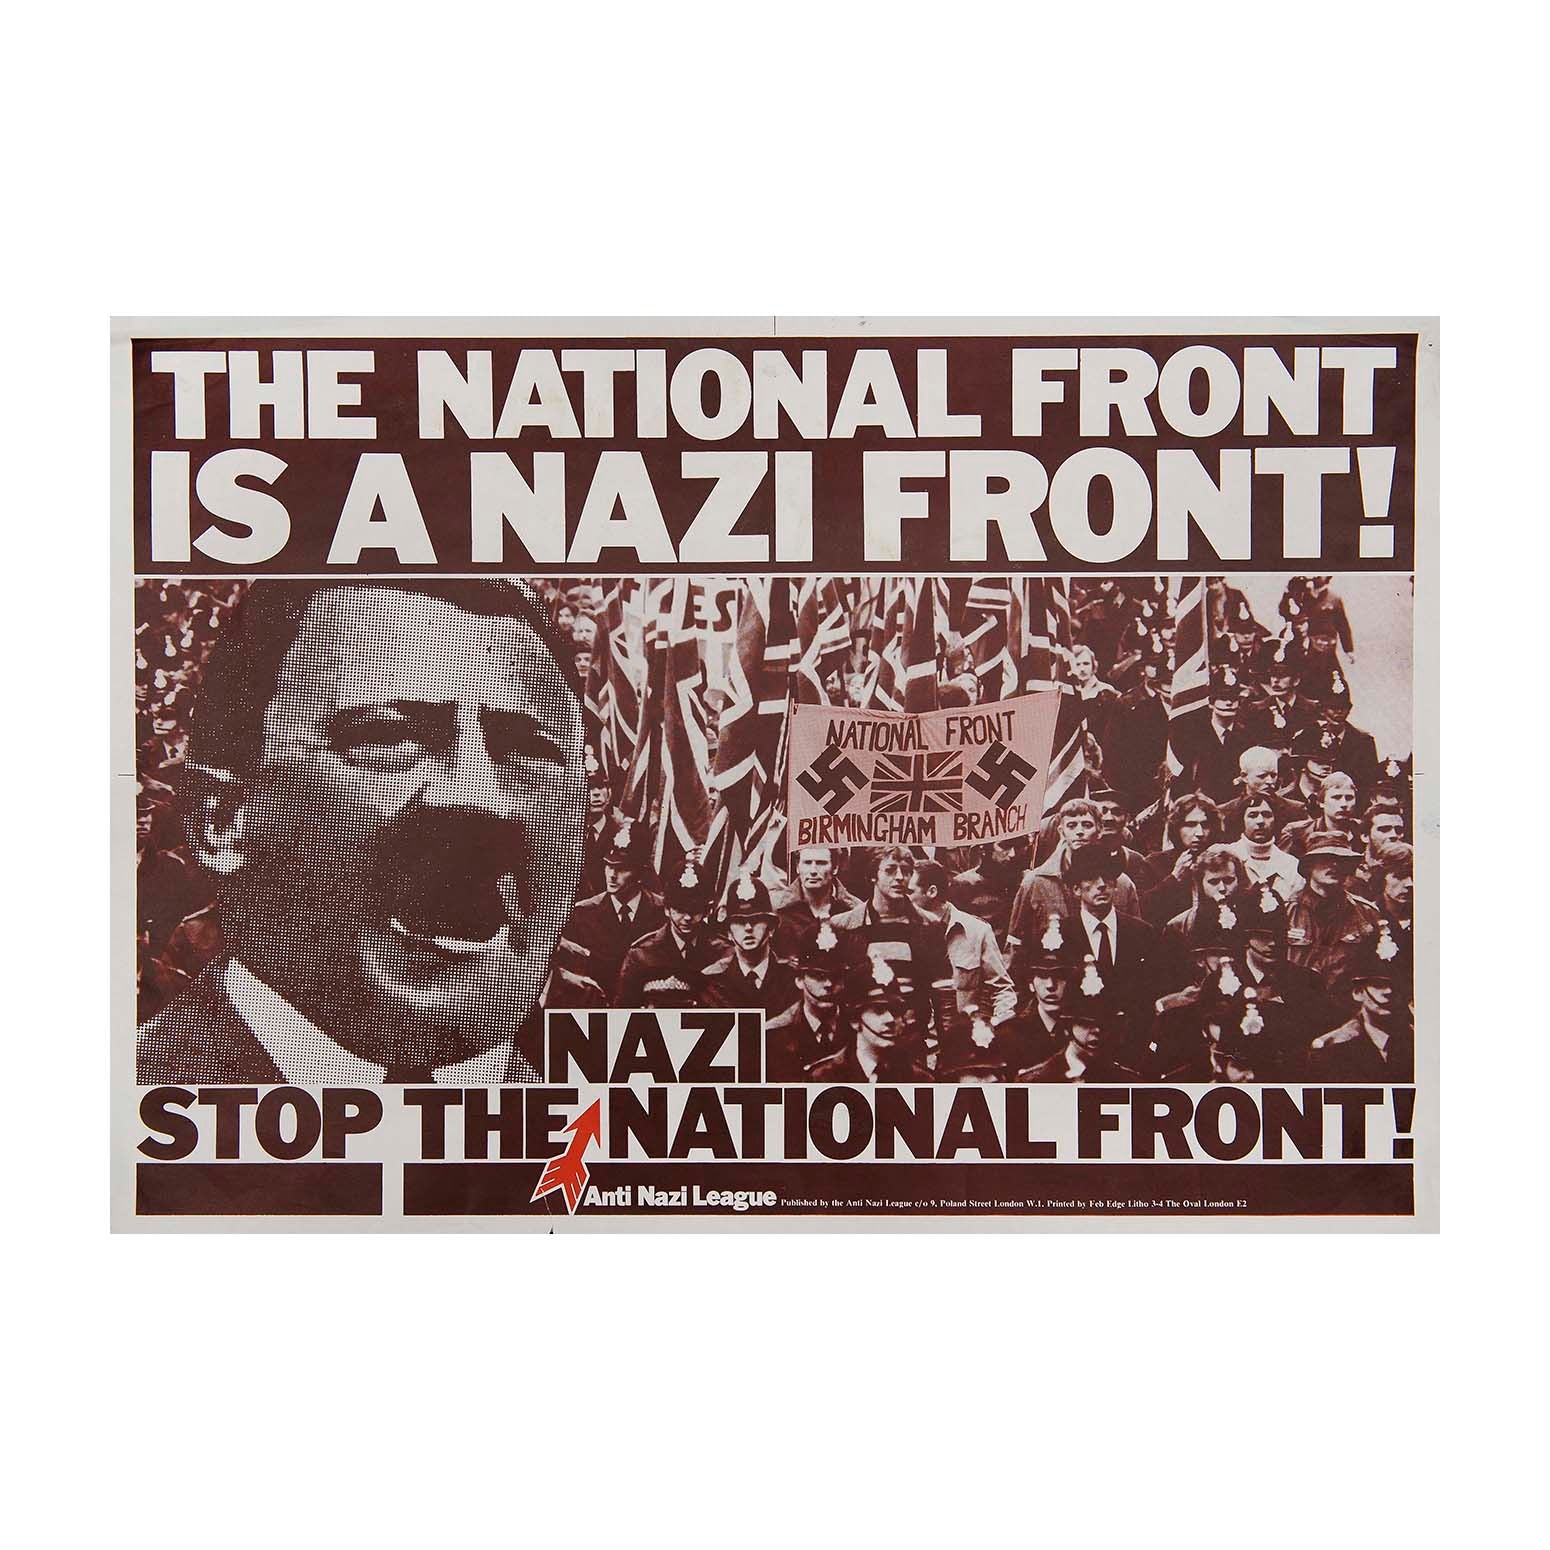 Original Anti-Nazi League designed by David King, 1978. National Front protest in Birmingham, with a group of men holding union flags flanked by police, and a close-up photographic image of Adolf Hitler on the left, under the slogan The National Front is a Nazi Front